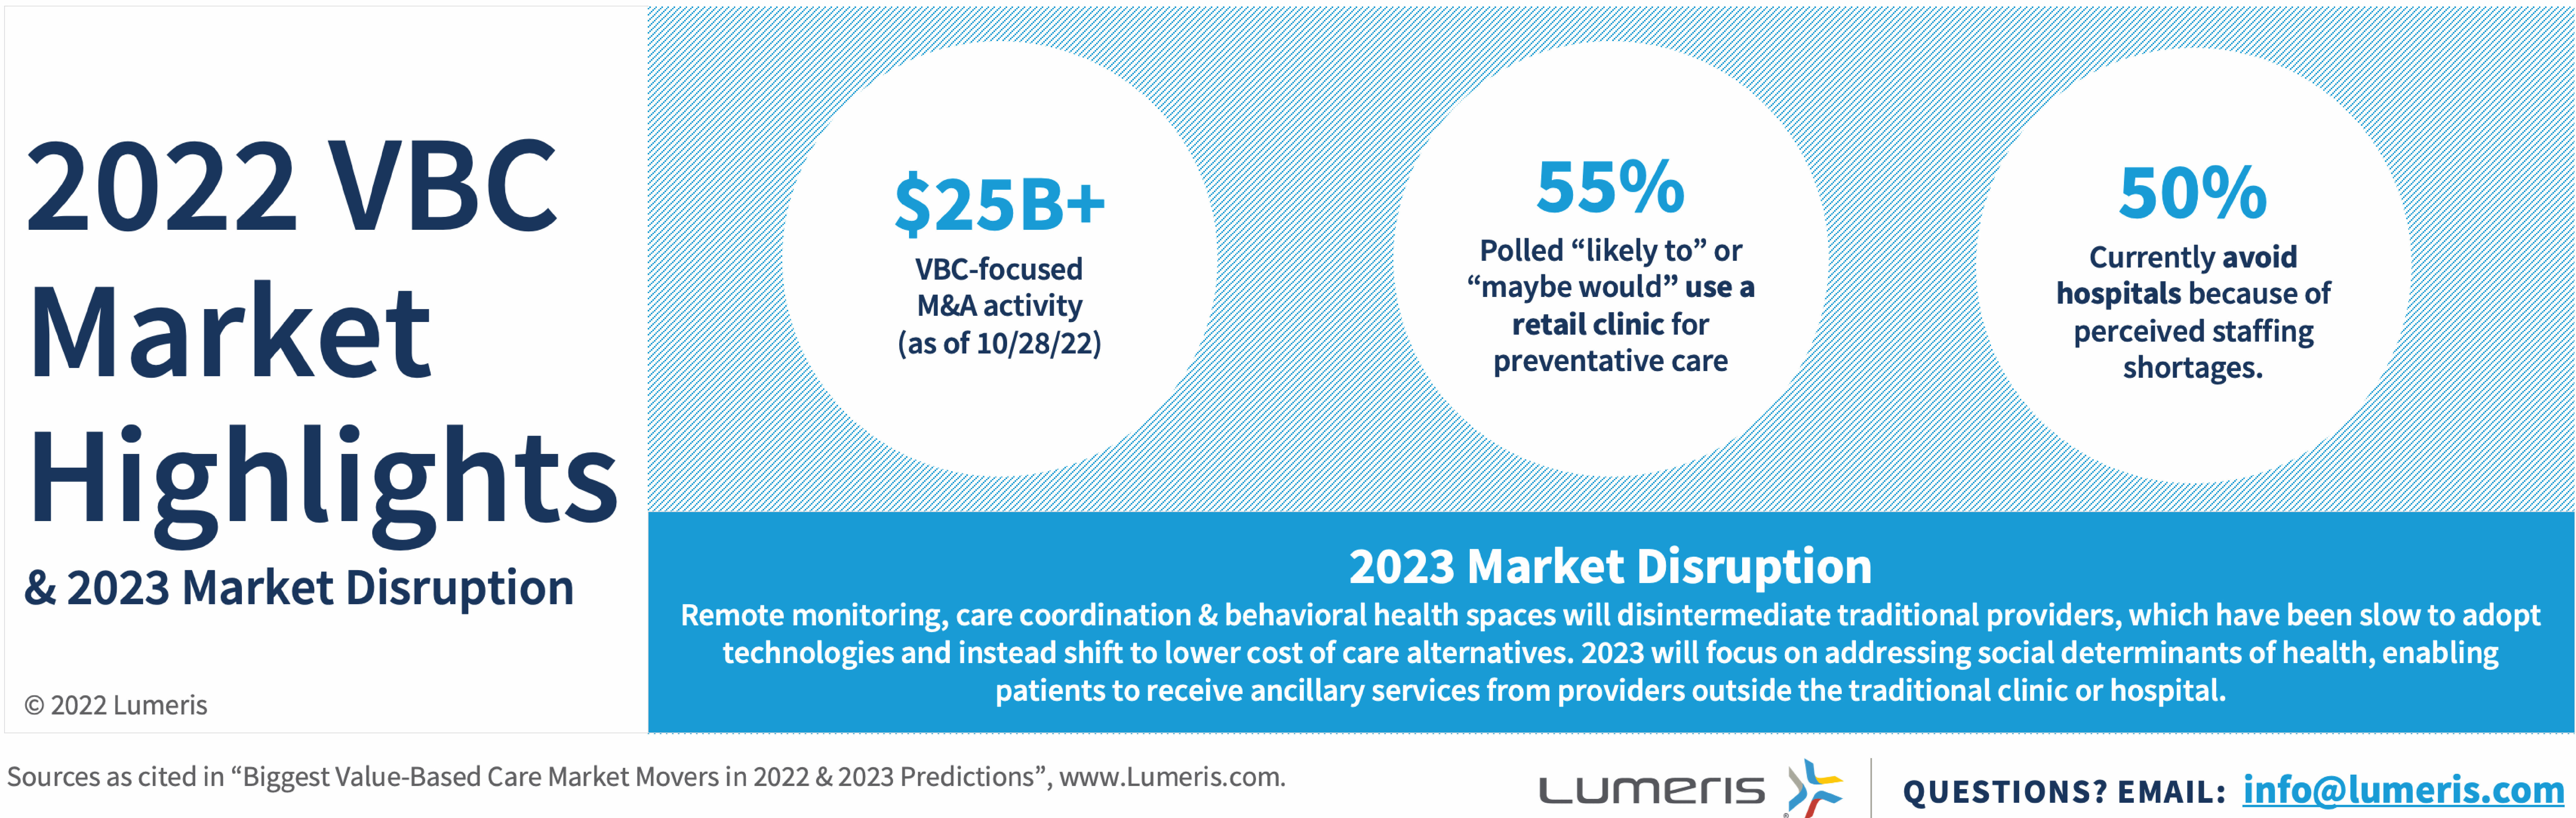 An infographic that shows value-based care trends for 2023, and market highlights from 2022.